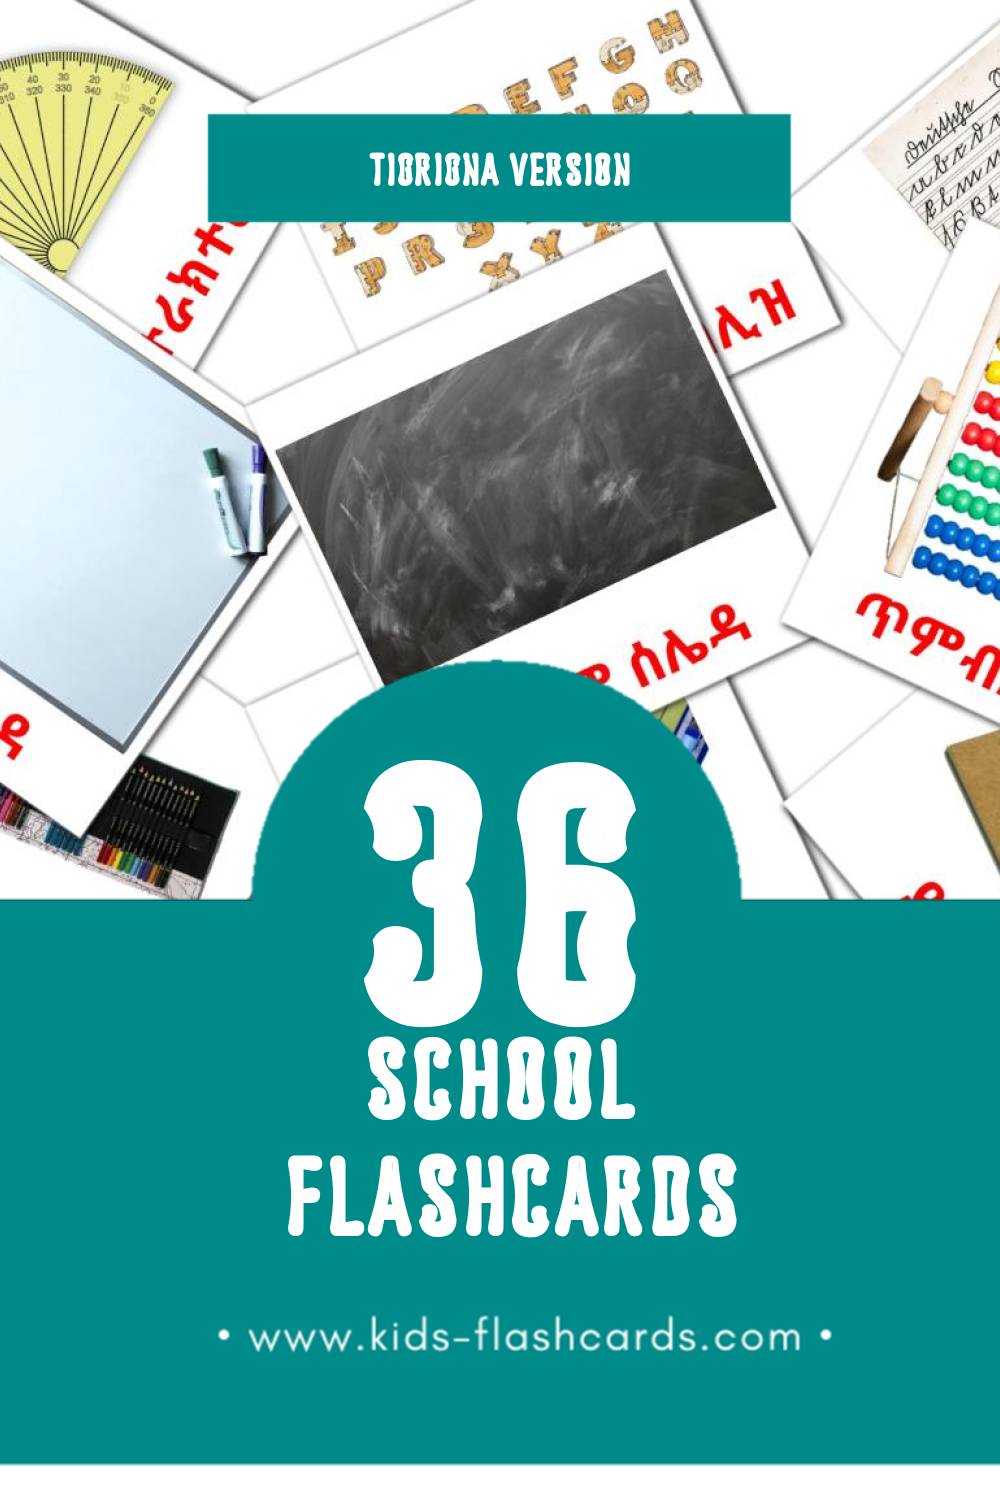 Visual ቤት ትምህርቲ Flashcards for Toddlers (36 cards in Tigrigna)